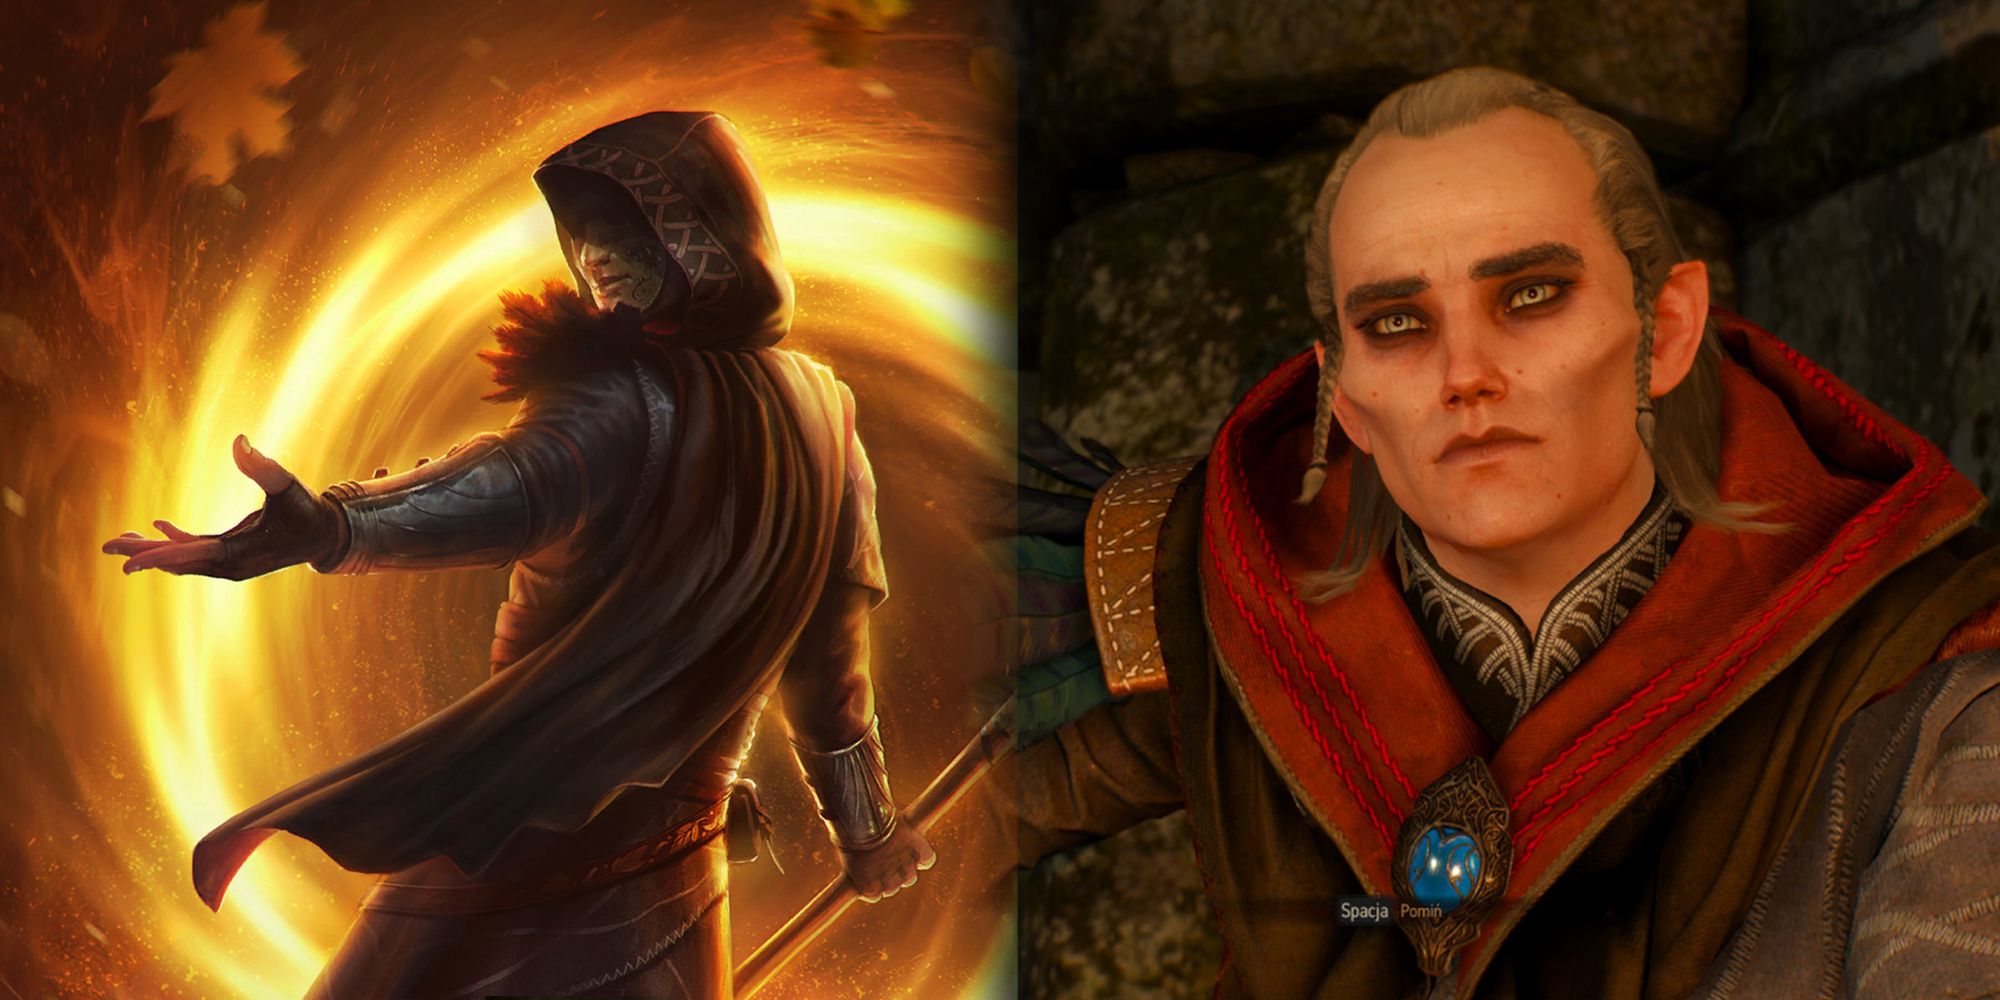 The Witcher - Gwent Card Art For An Elven Sage Side By Side With A Frame Of Avallac'h In The Witcher 3